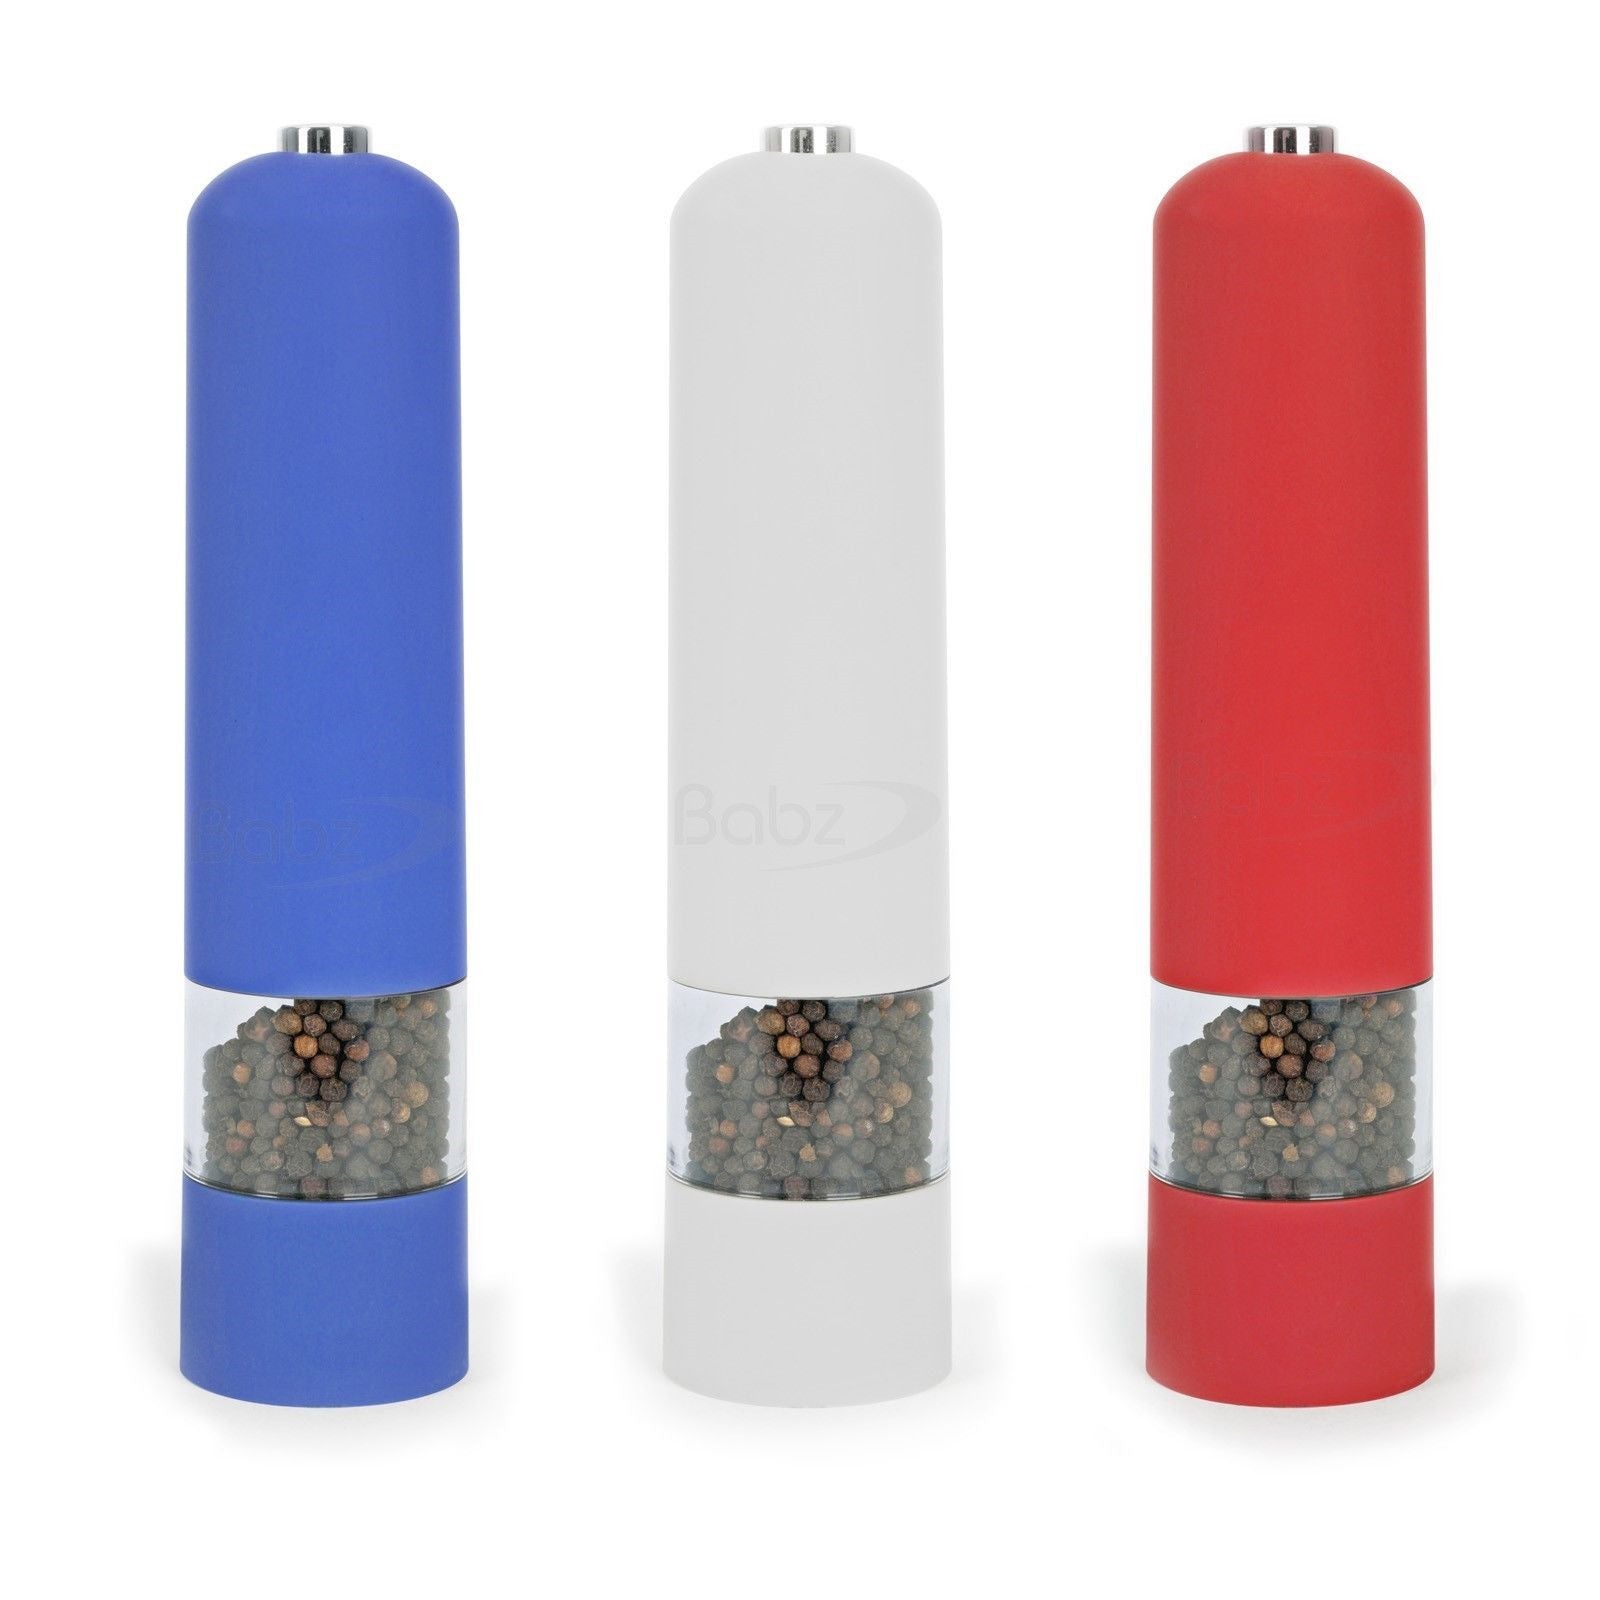 Blue / Red / White ABS Electric Electronic Salt Pepper Mill Grinder Pots